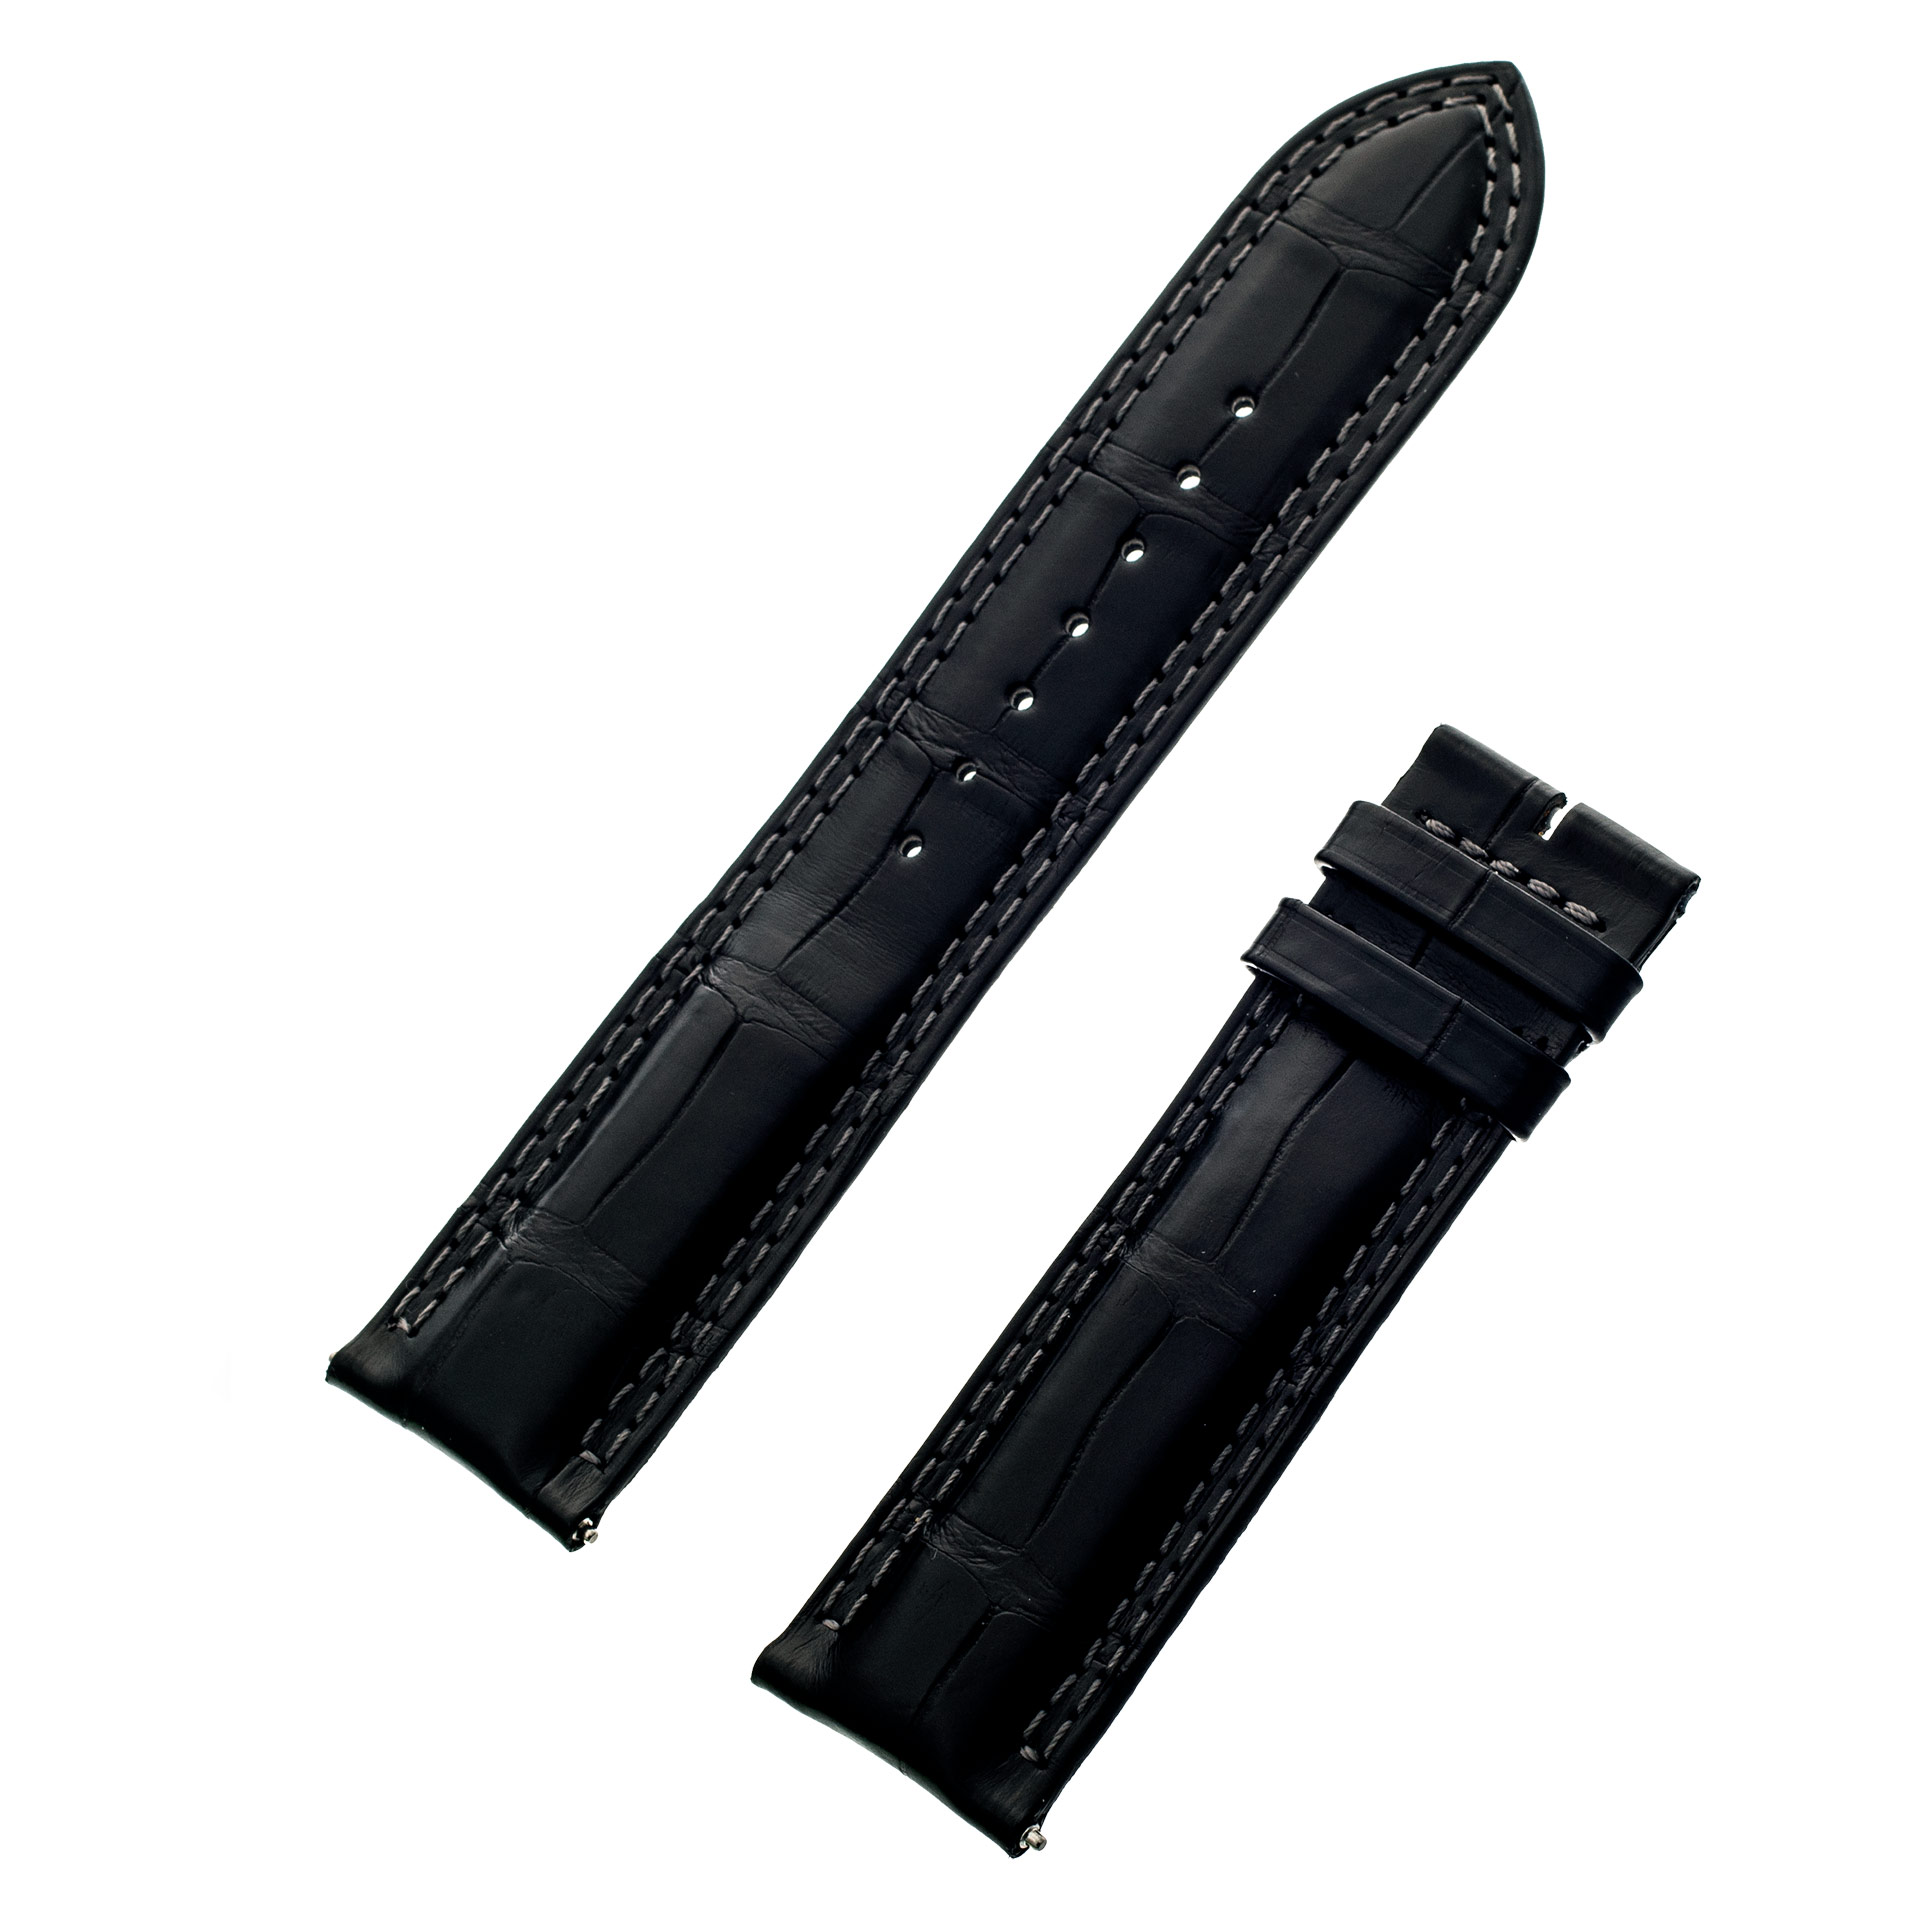 Jaeger Le Coultre black alligator strap with stiching for tang buckle. 22 mm x 20mm. 4.5" x 3"